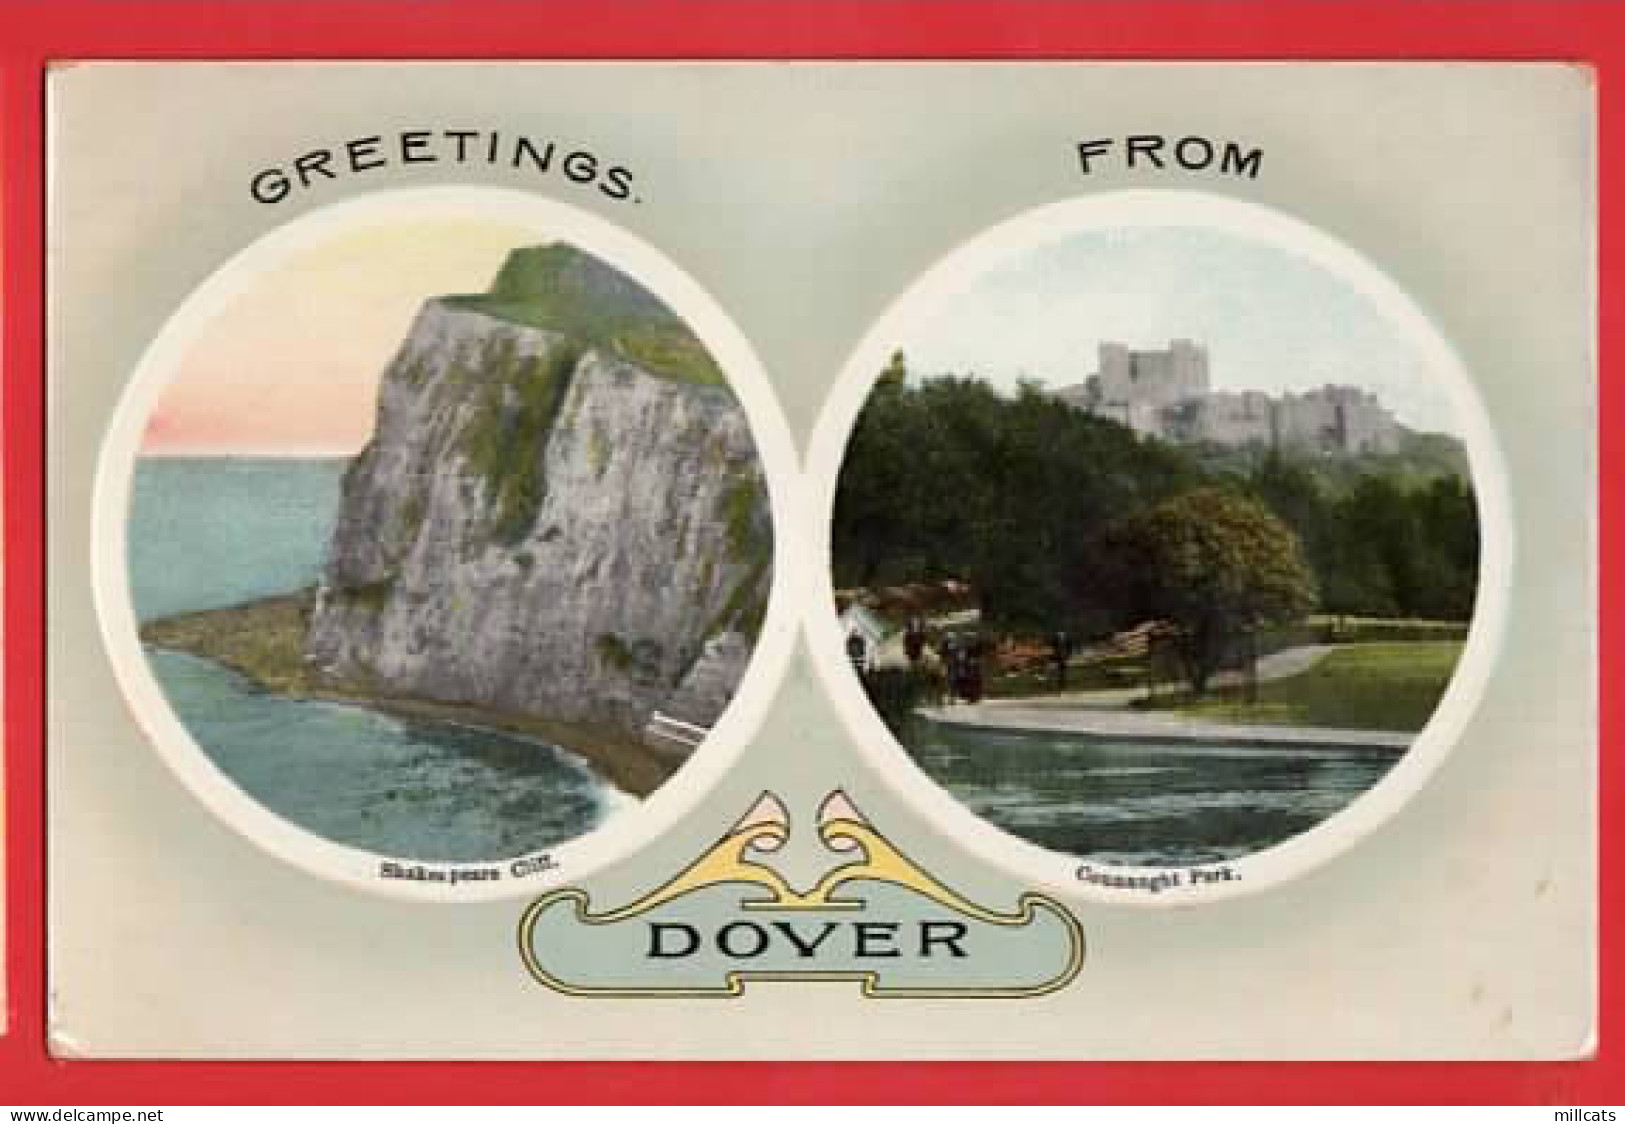 KENT DOVER TWO INSET VIEWS IN CIRCLES RP - Dover